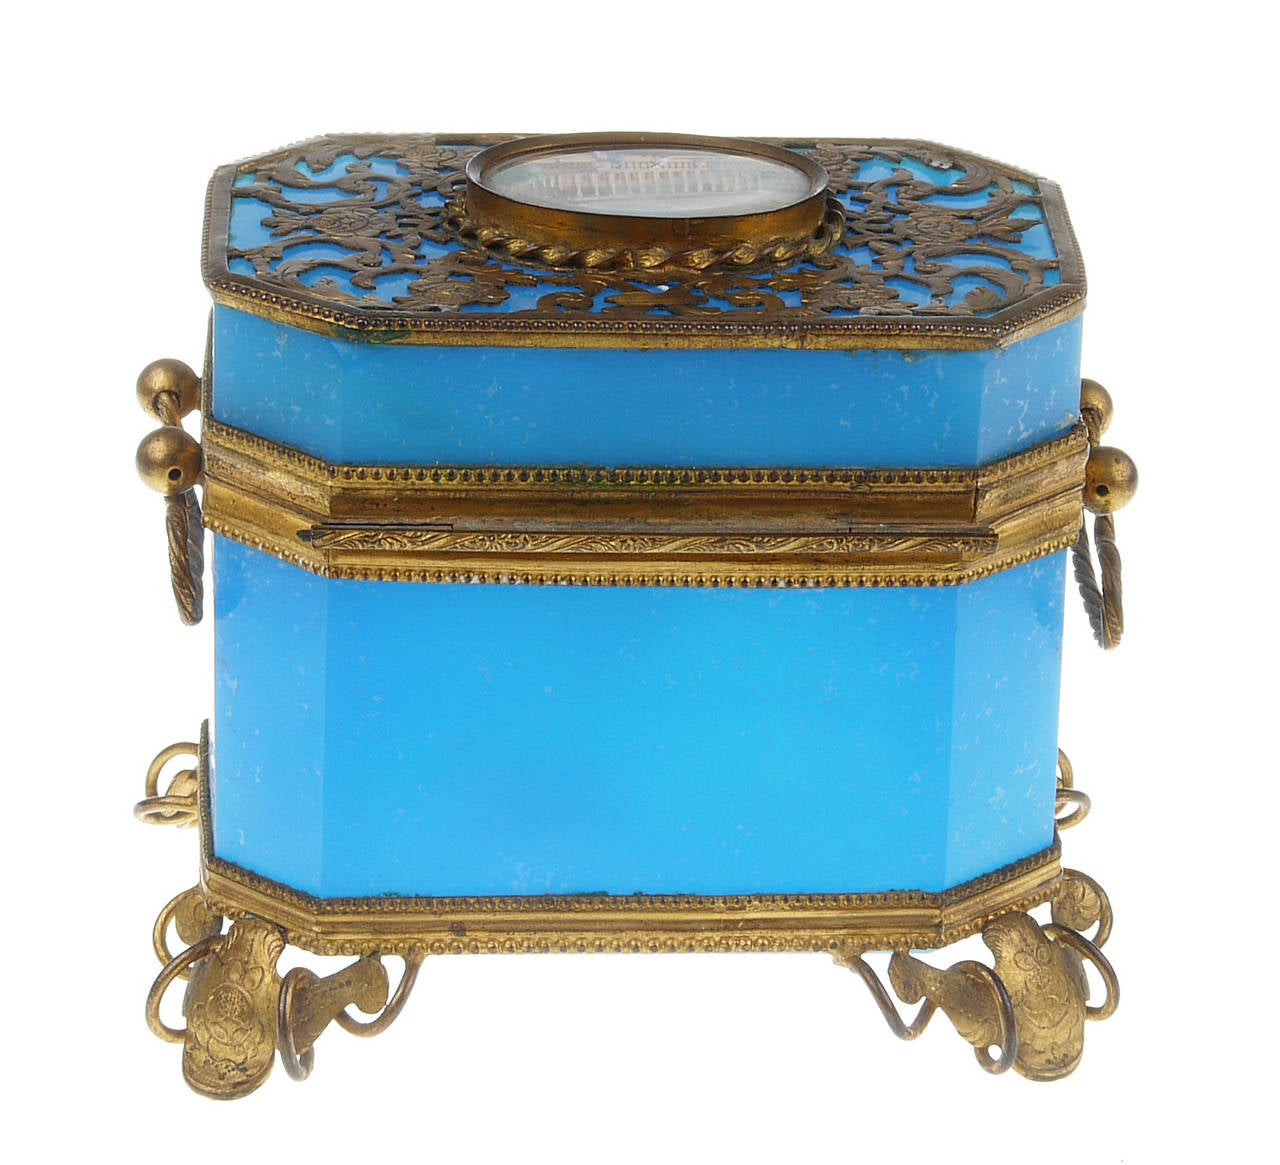 French Sevres Toilette box in translucent blue opaline. Rectangular with canted corners gilt ornaments and feet. Large escutcheon covering the front of the casket.